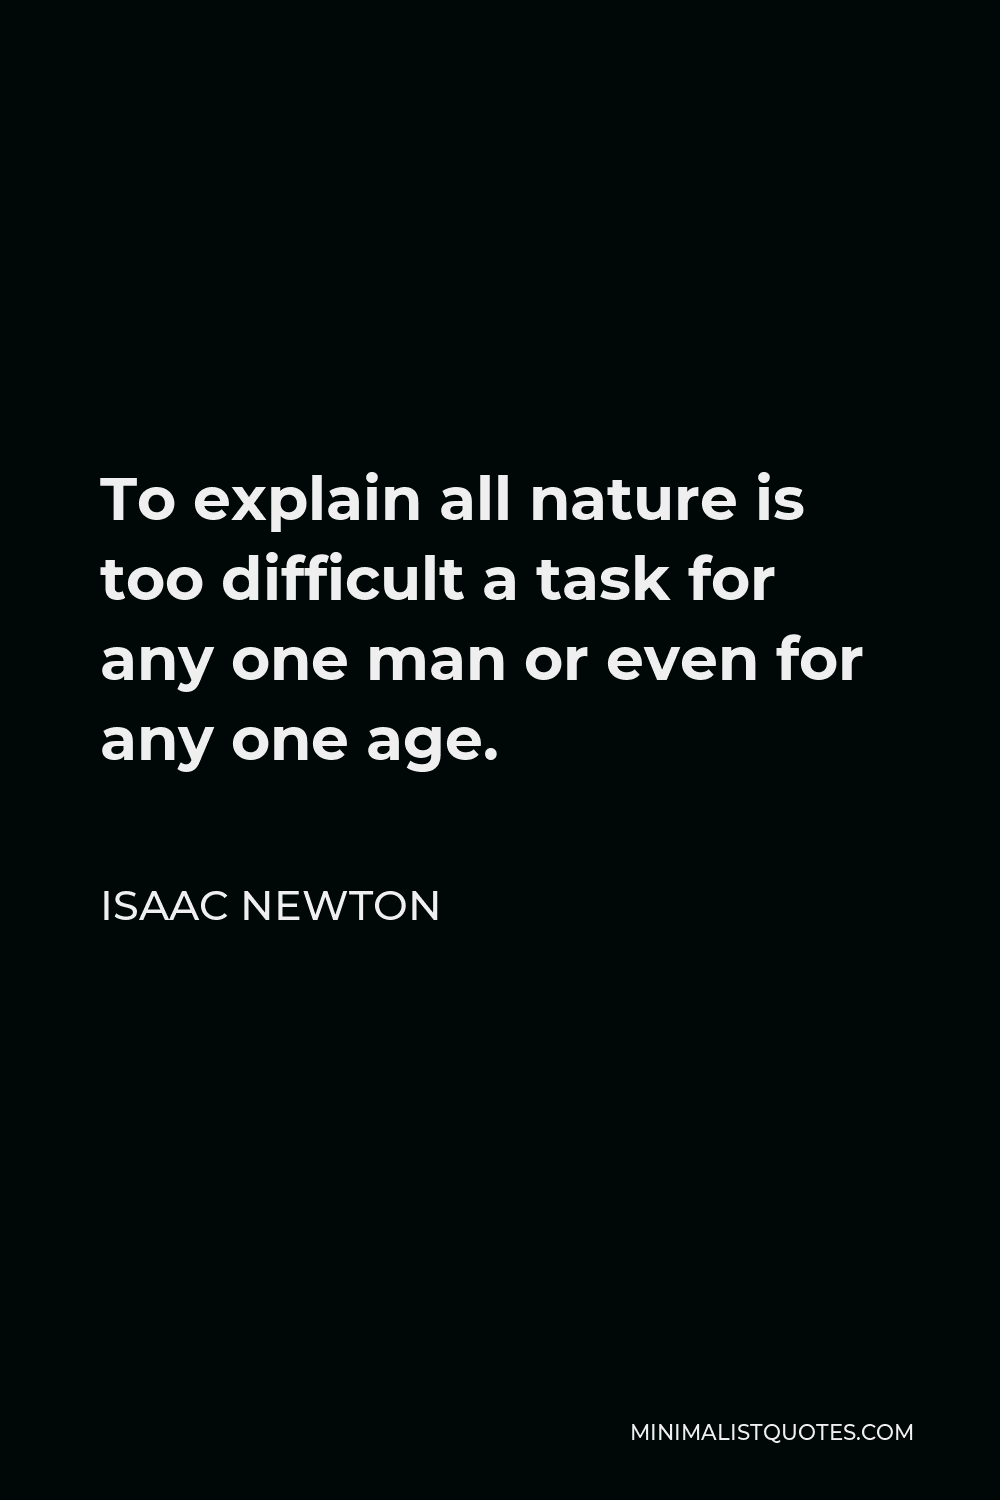 Isaac Newton Quote - To explain all nature is too difficult a task for any one man or even for any one age.